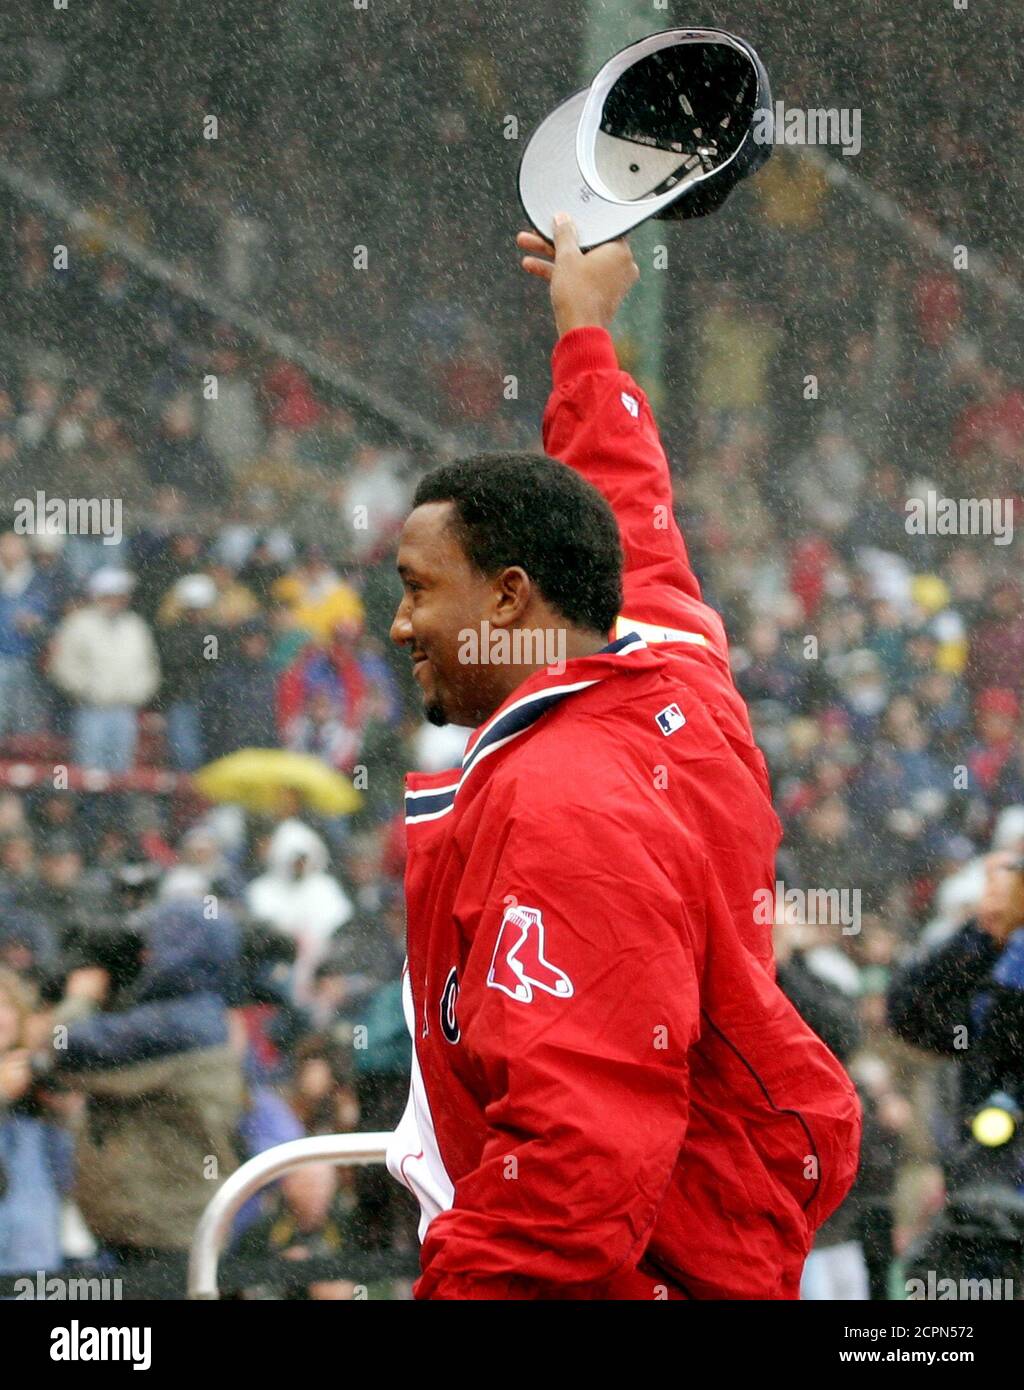 Three-time Cy Young award winning pitcher Pedro Marinez waves to Boston Red Sox fans at Fenway Park as he stands in the pouring rain during ceremonies before the Red Sox scheduled home opener April 11, 2003 in Boston. The game between the Boston Red Sox and the Baltimore Orioles was called off and delayed until another day due to the heavy rain. REUTERS/Jim Bourg  JRB Stock Photo